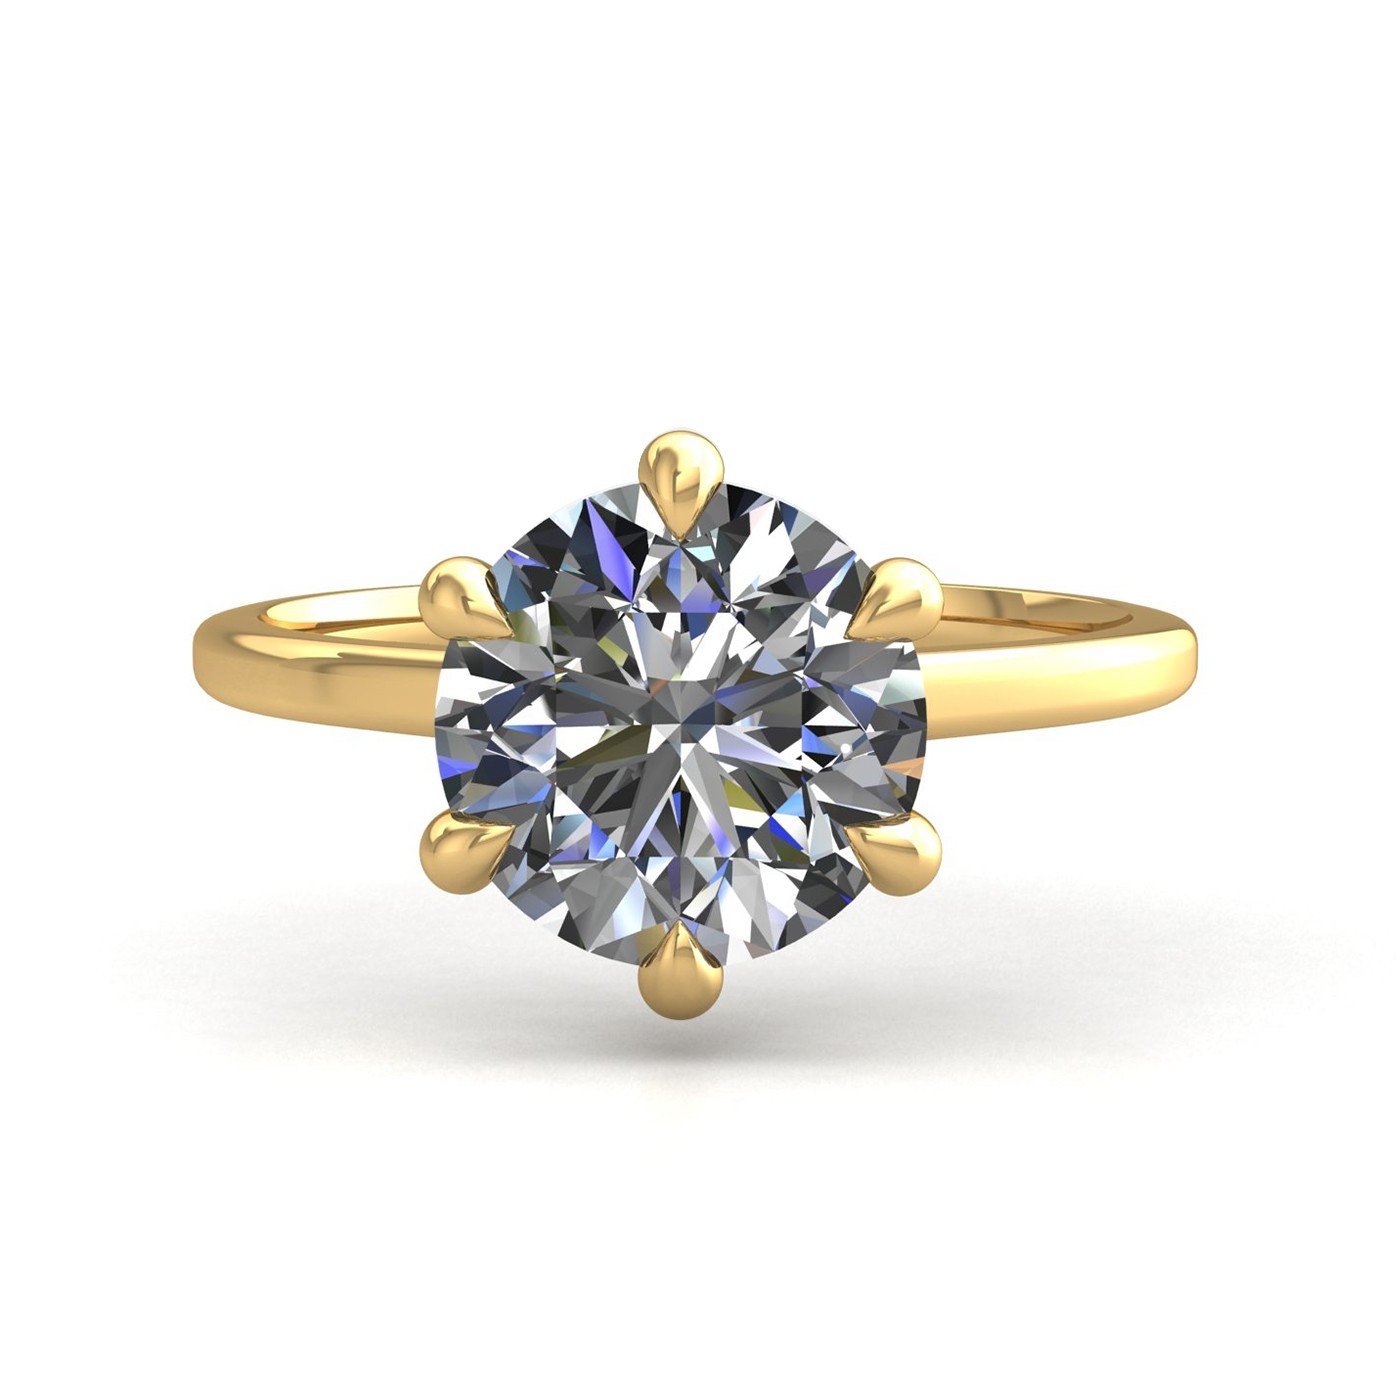 18k yellow gold 2,00 ct 6 prongs solitaire round cut diamond engagement ring with whisper thin band